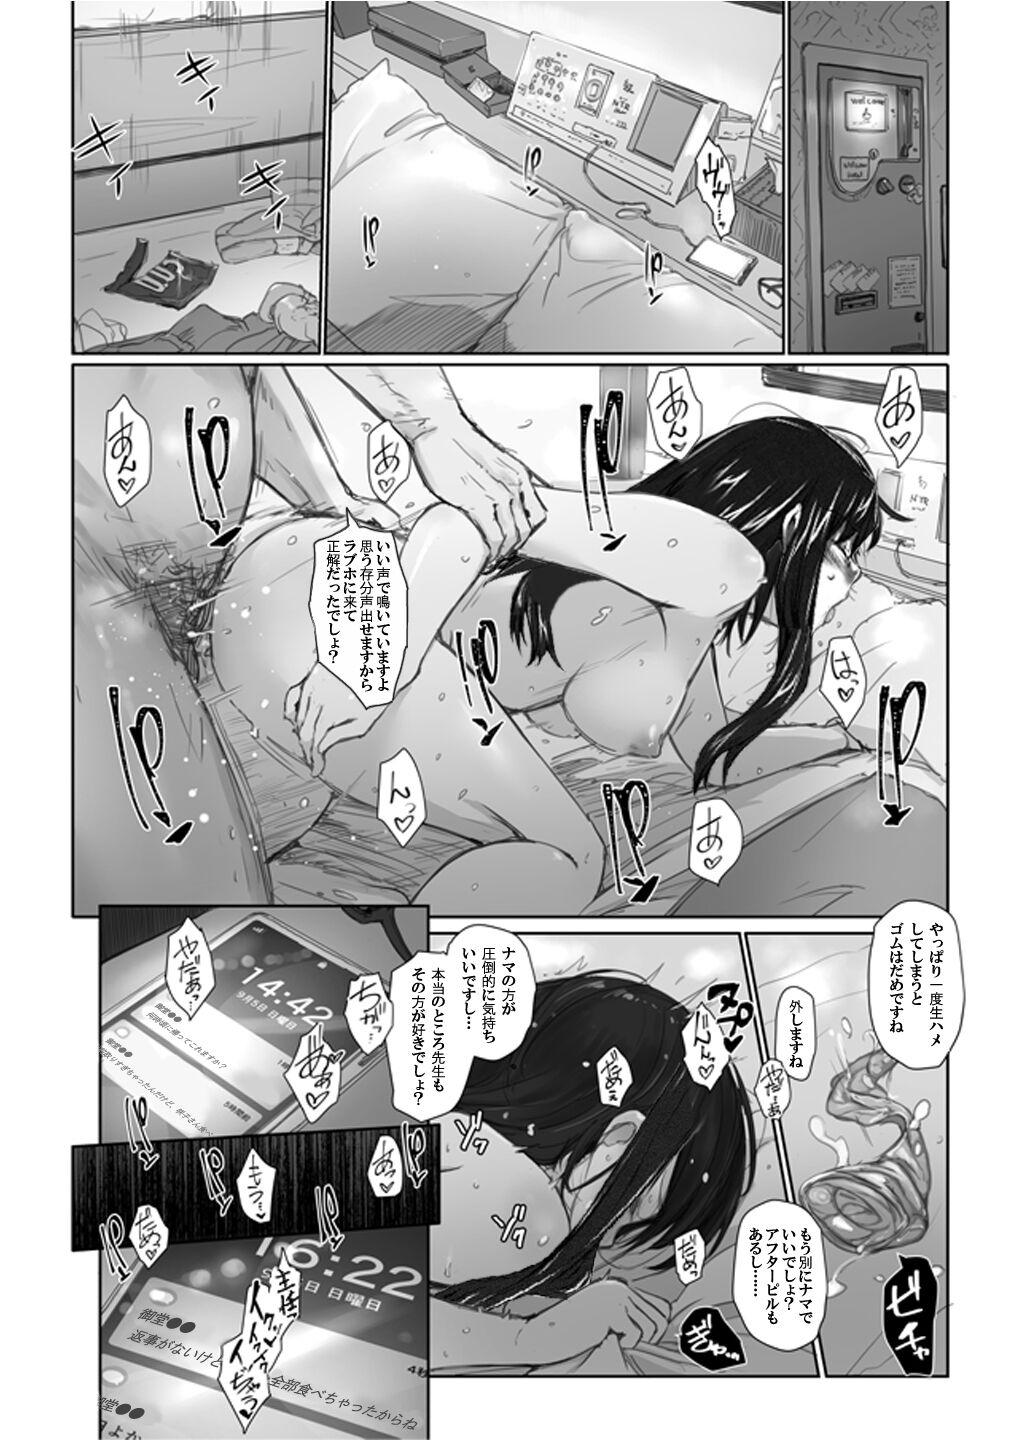 Sakiko-san in delusion Vol.7 ~Sakiko-san's circumstance at an educational training Route2~ (collage) (Continue to “First day of study trip” (page 42) of Vol.1) 11